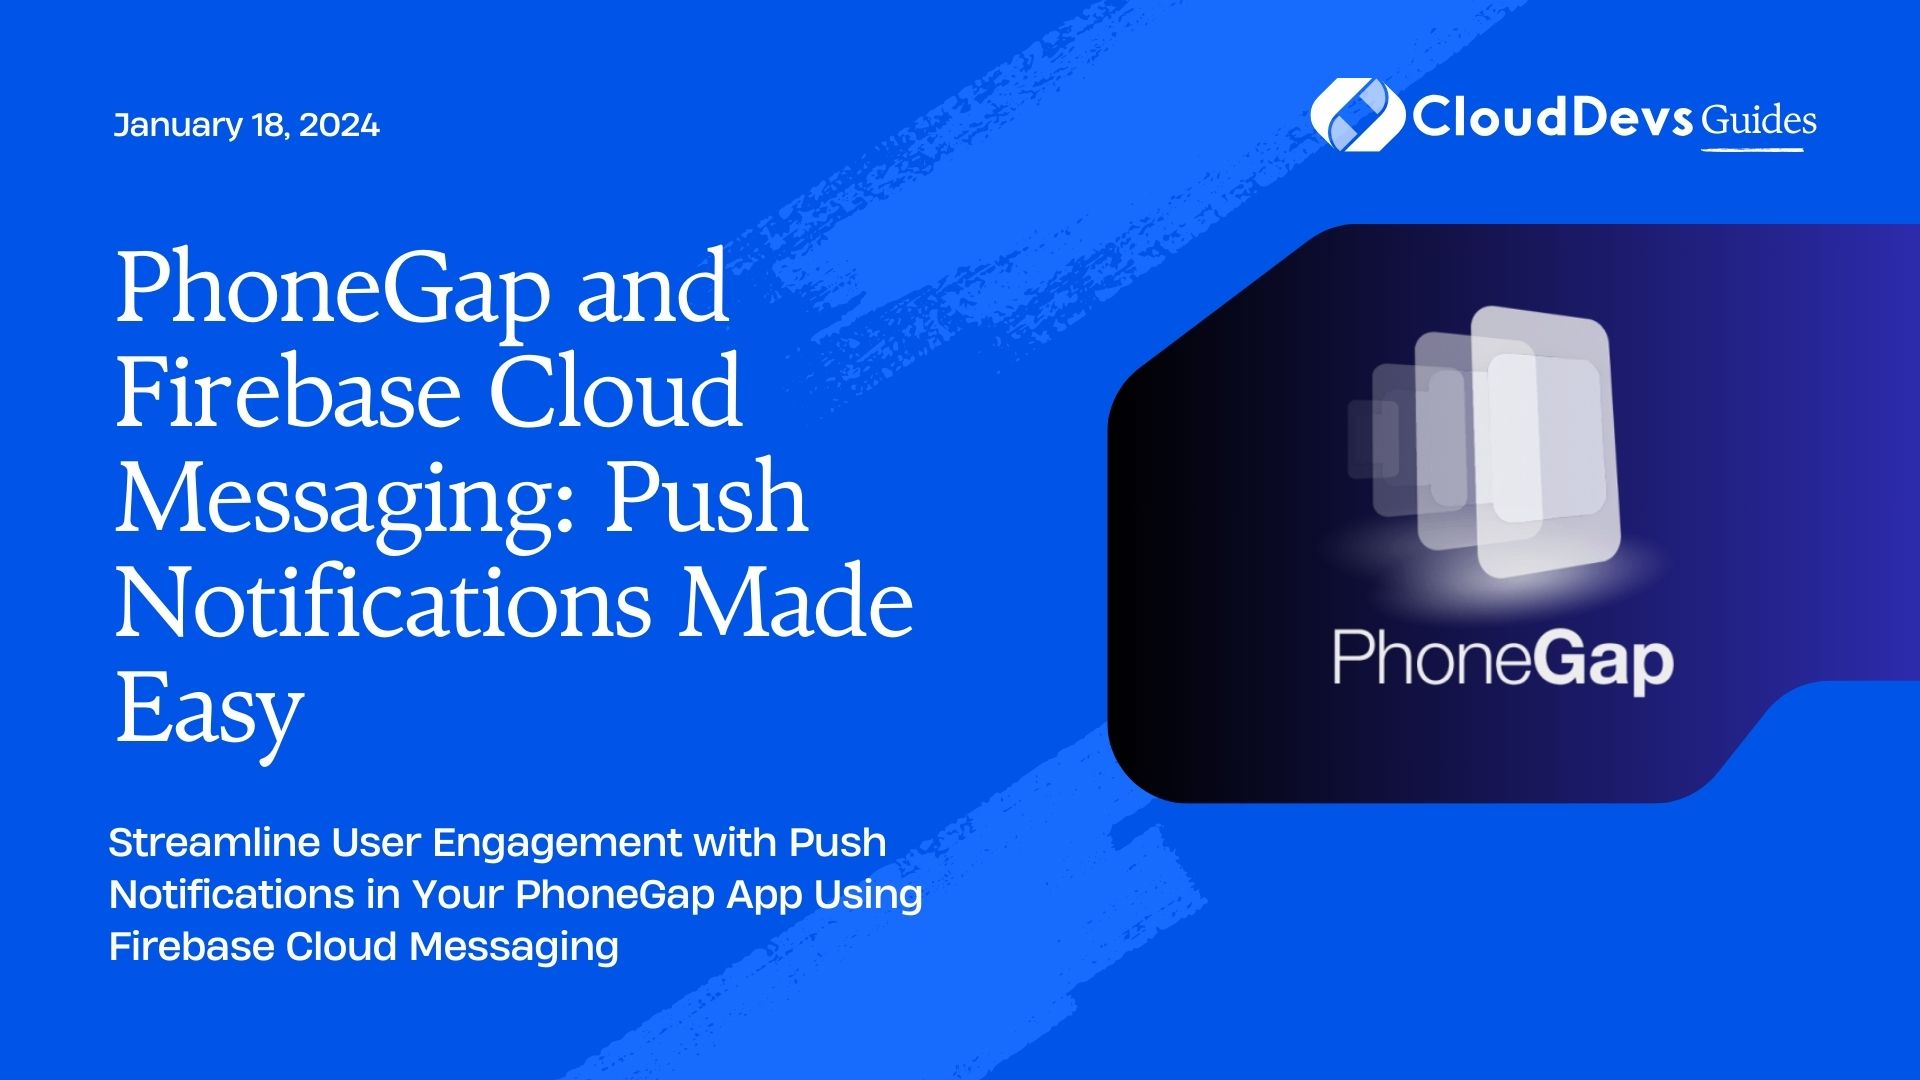 PhoneGap and Firebase Cloud Messaging: Push Notifications Made Easy